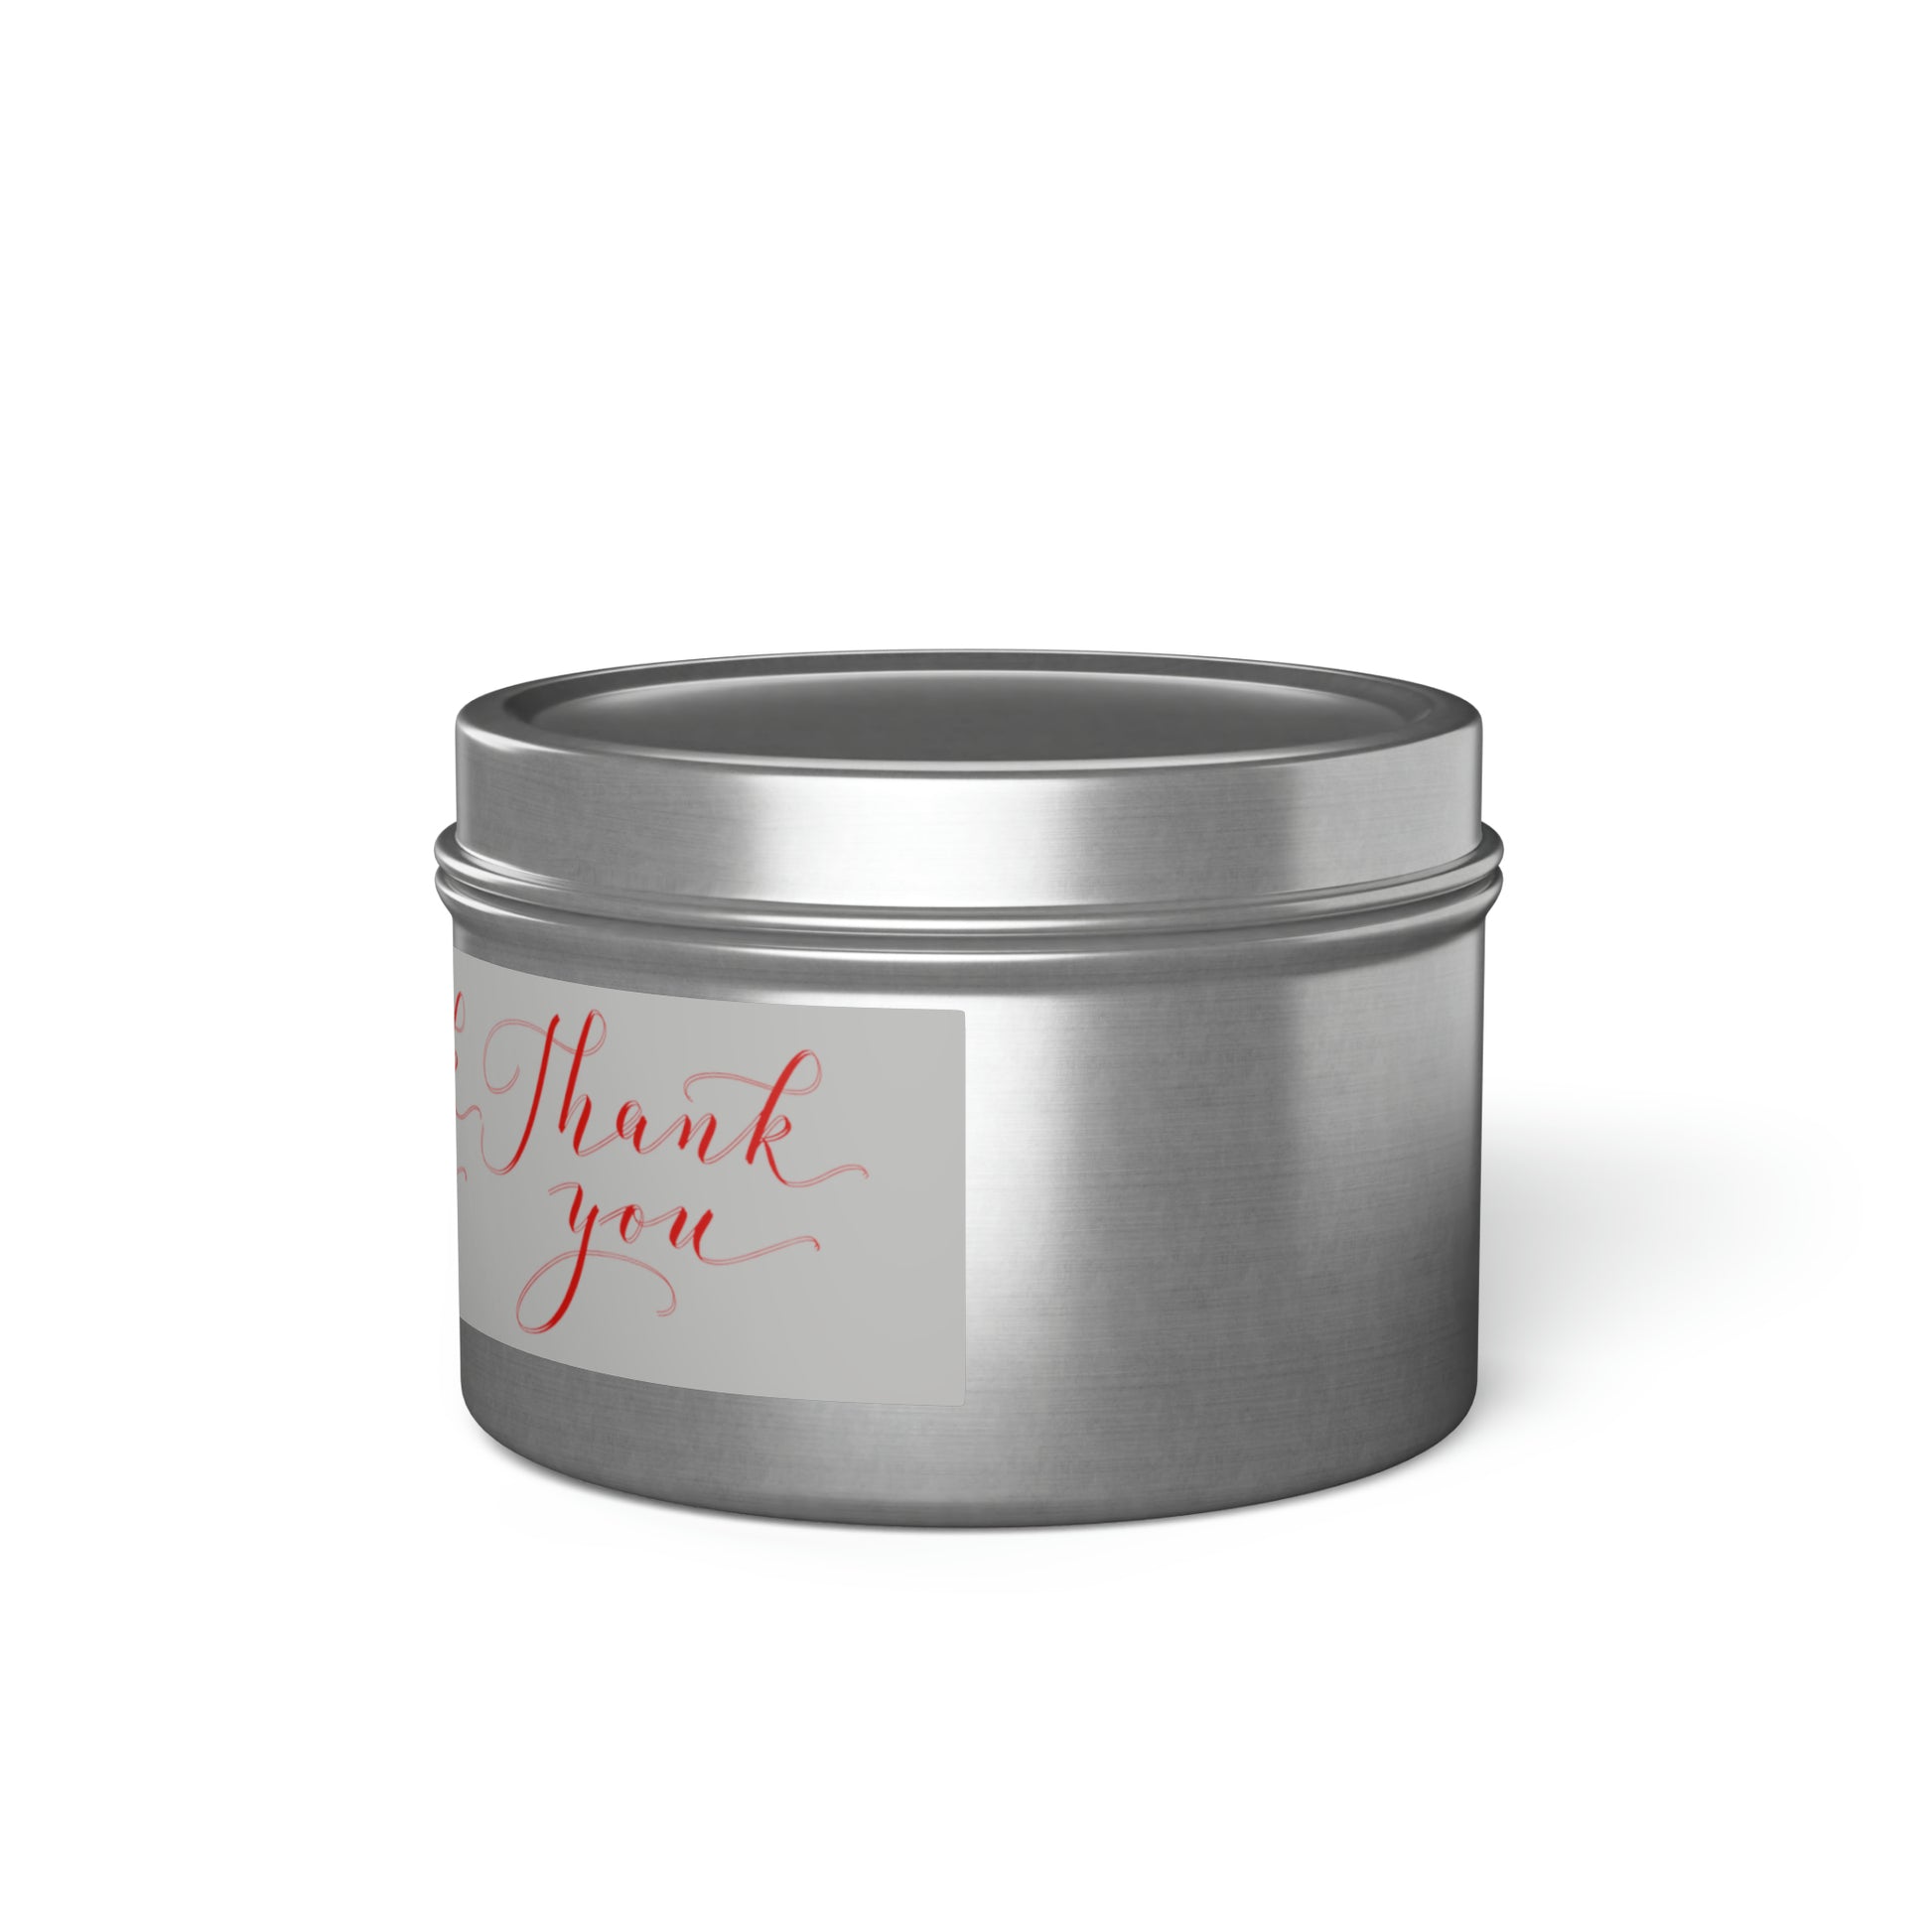 Replace the product in the sentence below with the given product name and brand name.
Sentence: A silver scented tin candle with the words thank you on it.
Product Name: Scented Tin Candle: 4 oz.; 2 fragrances; Silver; Thank you
Brand Name: Printify

A Printify silver scented tin candle with the words thank you on it.